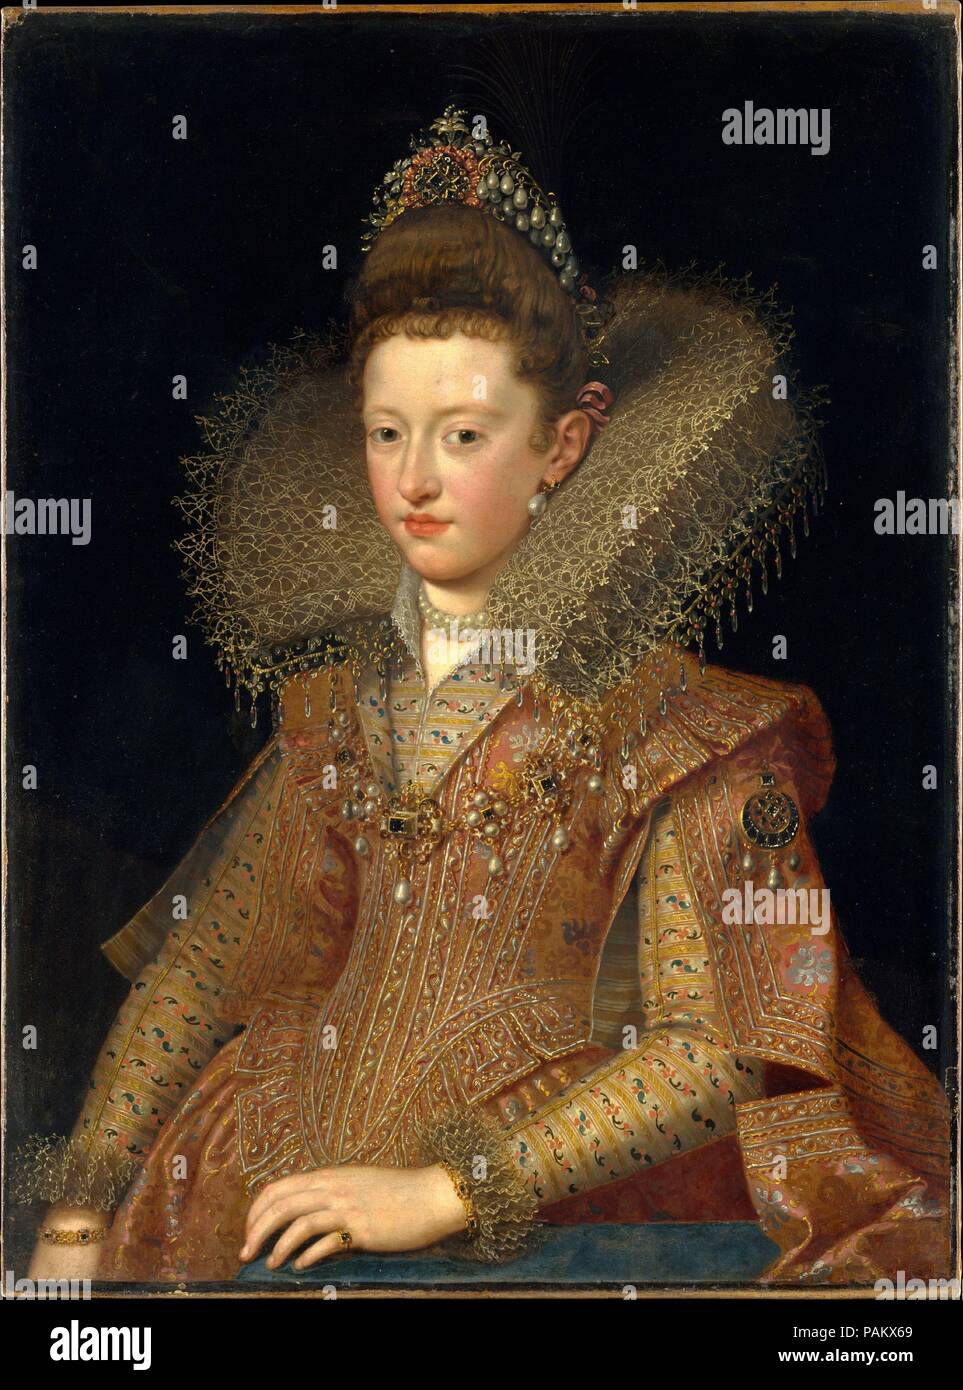 Margherita Gonzaga (1591-1632), Princess of Mantua. Artist: Frans Pourbus the Younger (Netherlandish, Antwerp 1569-1622 Paris). Dimensions: 36 1/2 × 27 1/4 in. (92.7 × 69.2 cm).  Pourbus was court painter of Archduke Albert in Brussels when in 1600 he went to Italy at the invitation of Vincenzo Gonzaga, Duke of Mantua. This portrait must depict the Duke of Mantua's daughter, Margherita, to judge from Pourbus's full-length portrait of her dated 1605 in the Uffizi, Florence. In this period Rubens also worked for Vincenzo Gonzaga, but he eagerly left the painting of formal portraits and a gallery Stock Photo